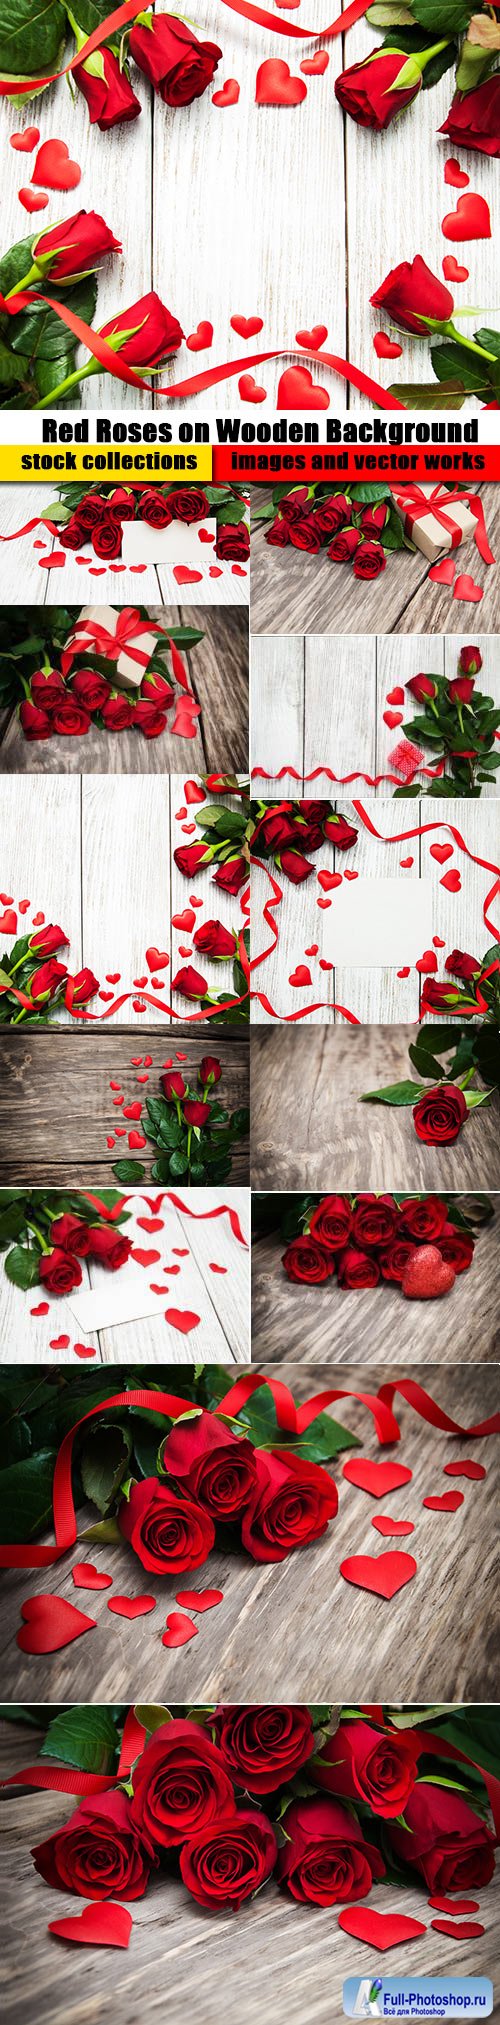 Red Roses on Wooden Background